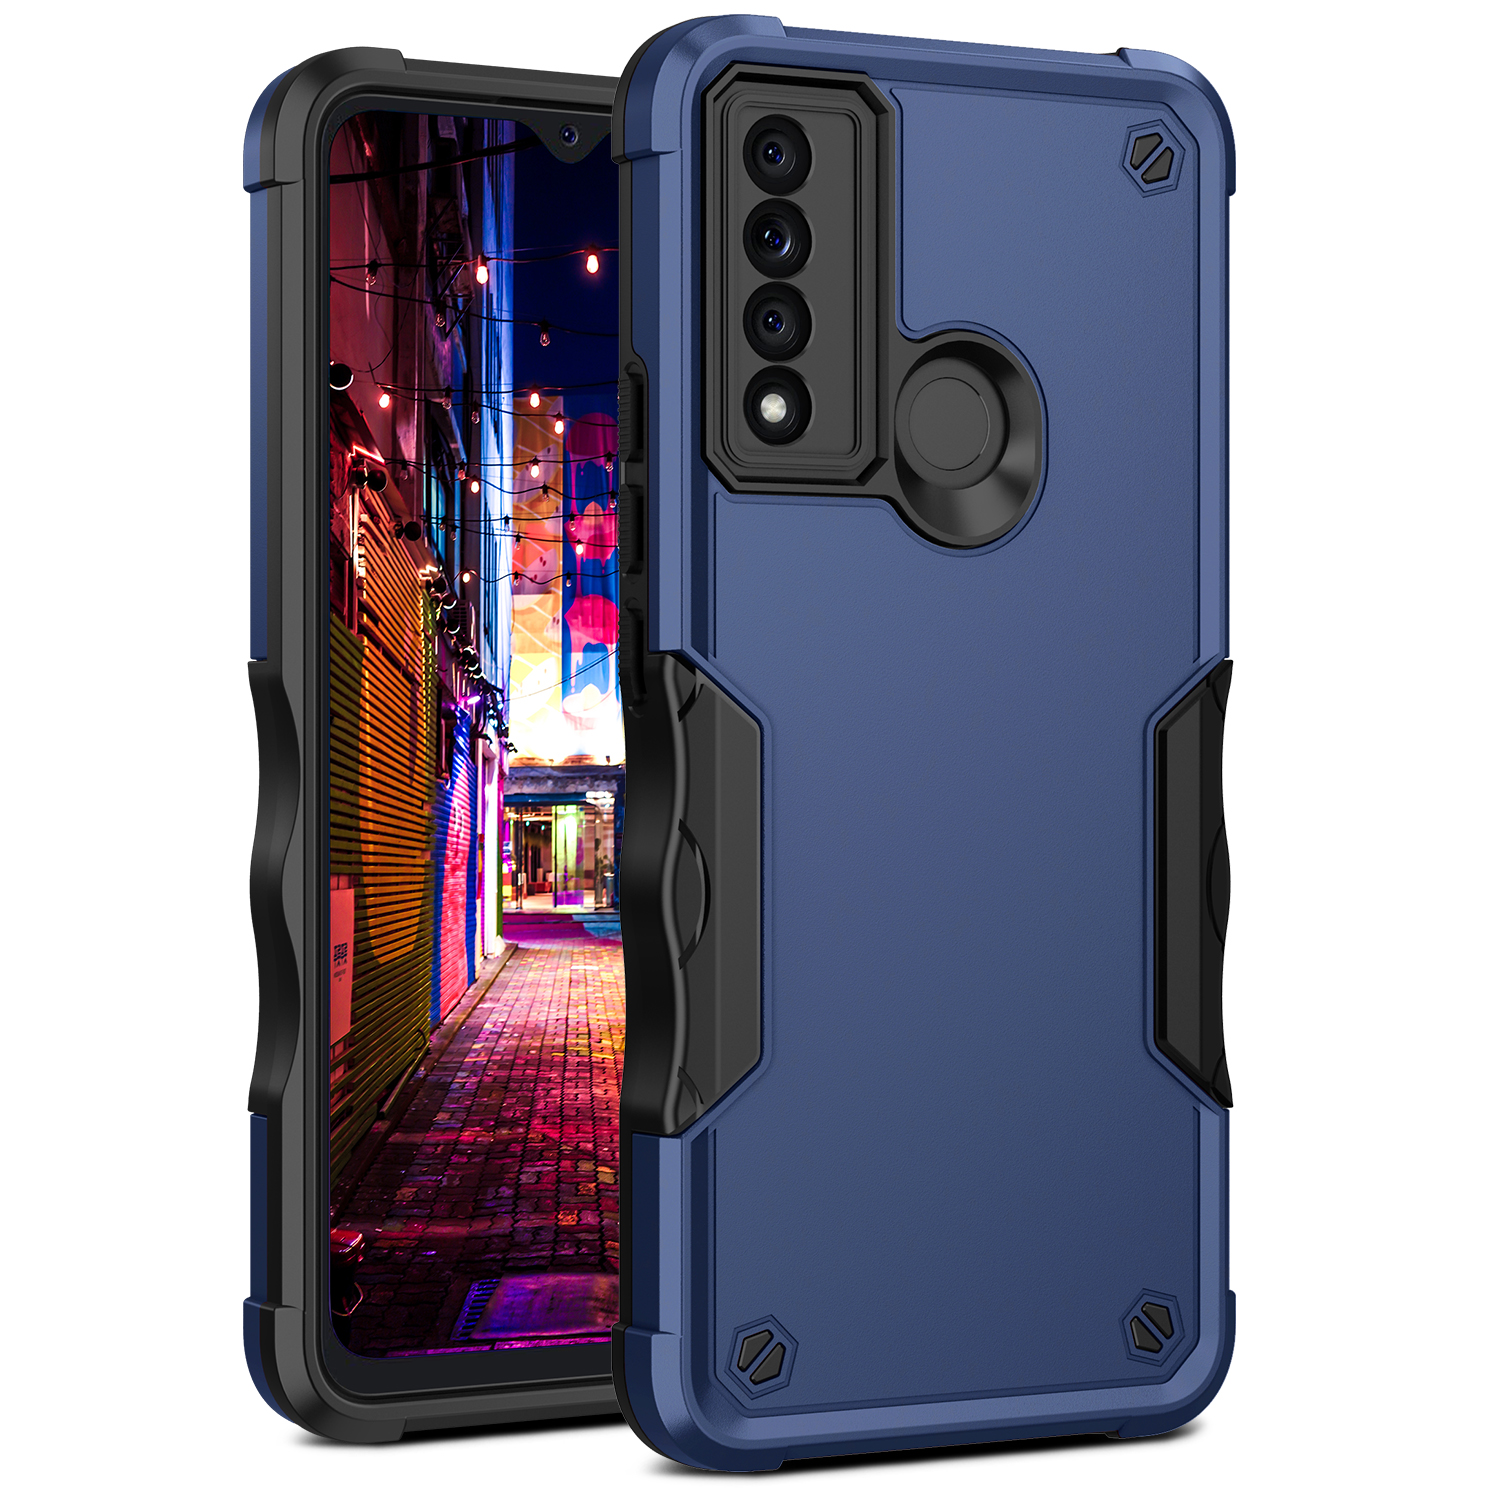 Strong Armor Grip Pattern Heavy Duty Shockproof Protective Cover Case for TCL 20 XE (Navy Blue)